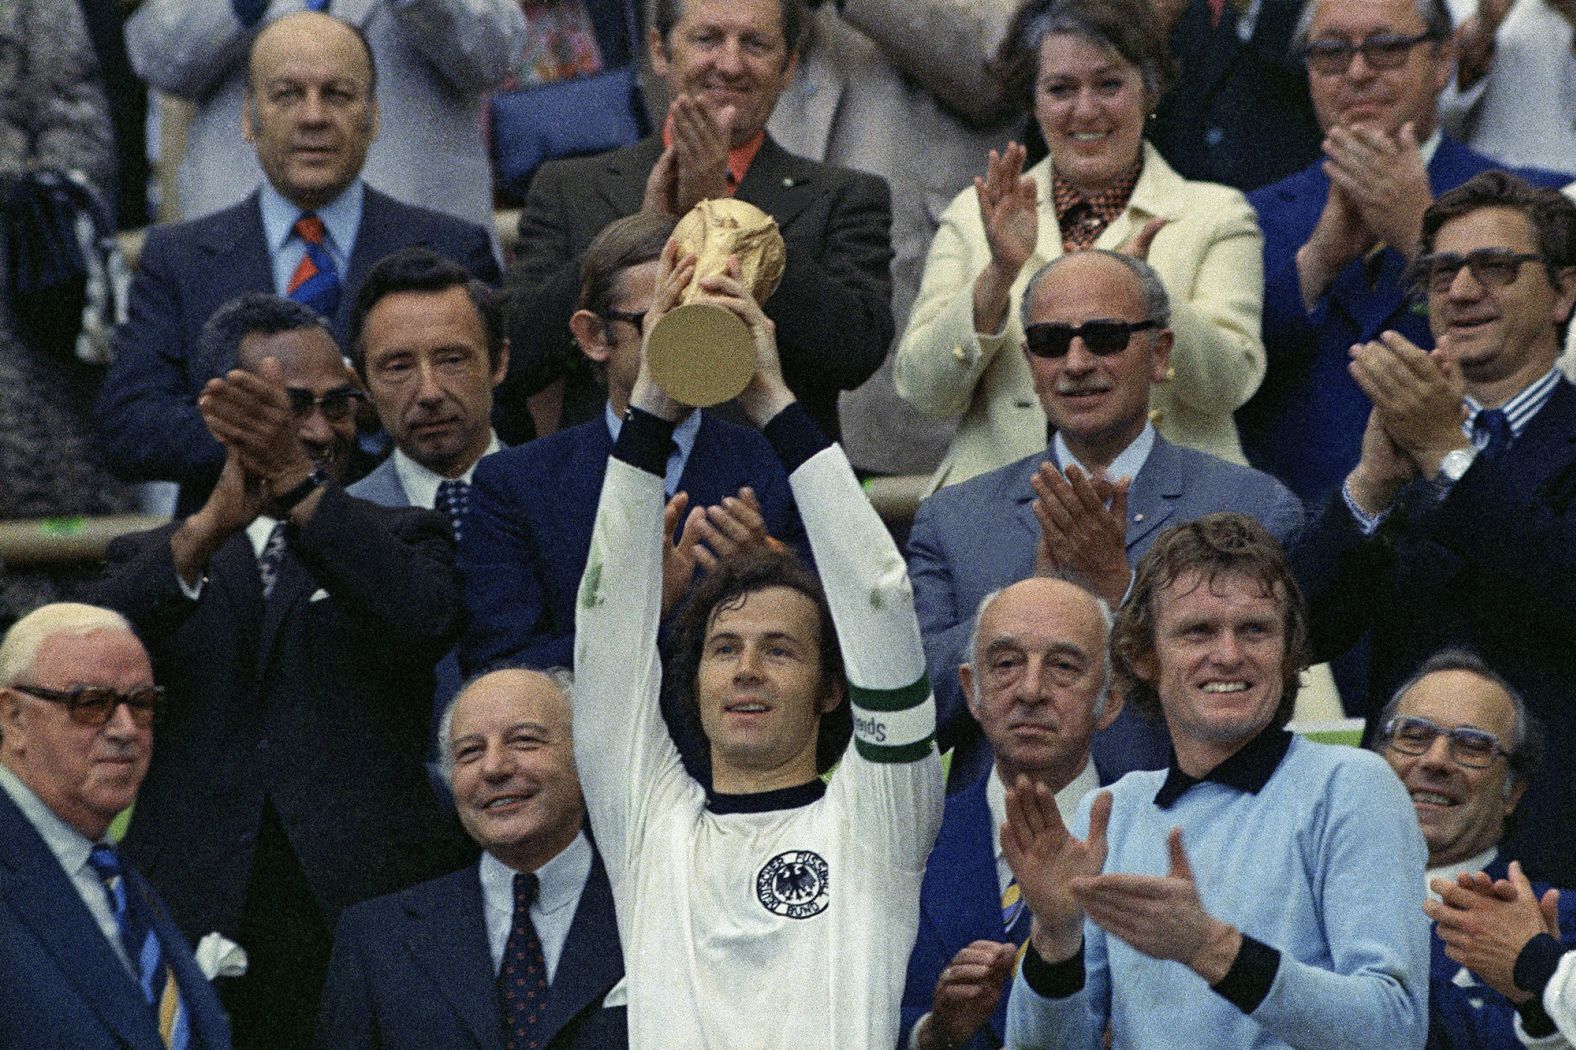 German soccer icon <a href="https://www.cnn.com/2024/01/08/sport/franz-beckenbauer-death-spt-intl/" target="_blank">Franz Beckenbauer</a>, widely considered to be one of the greatest players in the history of the game, died on January 7, according to the German football federation. He was 78.